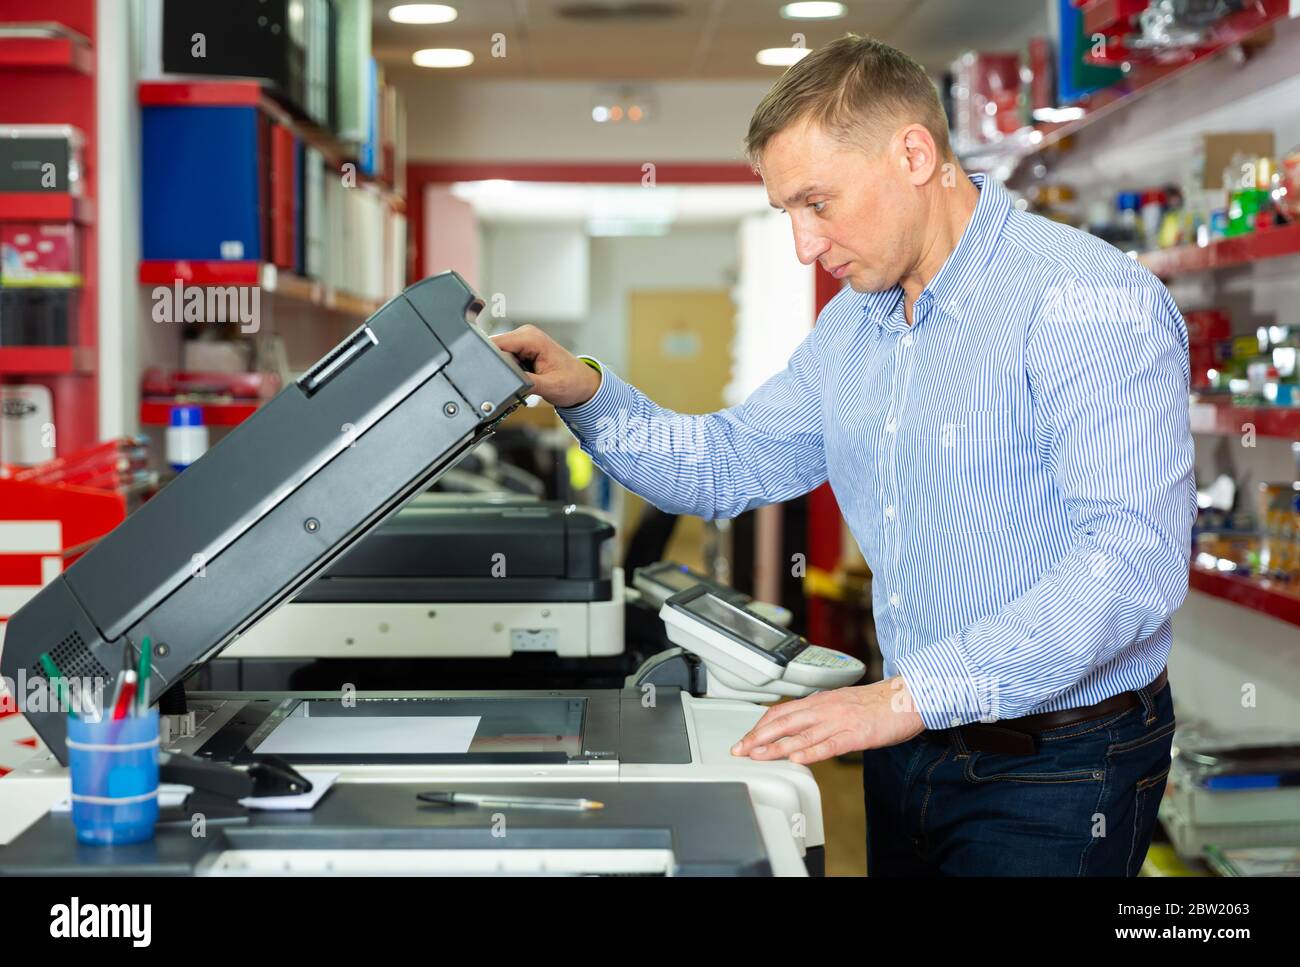 Worker is printing a file, document in the office room Stock Photo